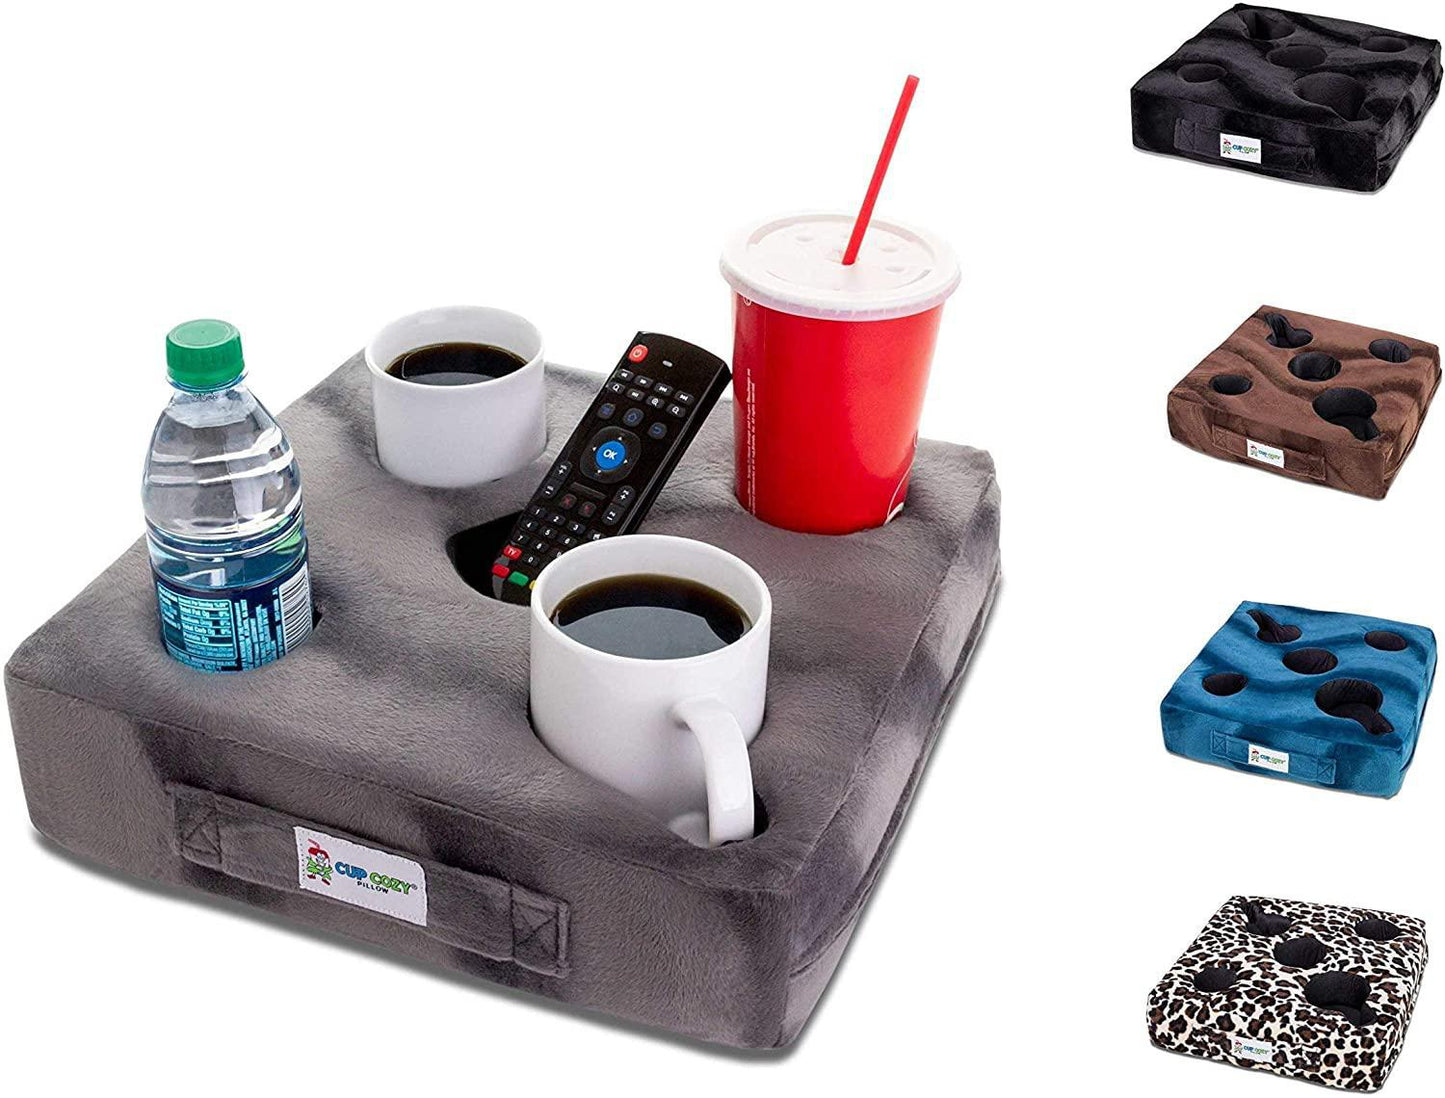 sofa coaster to prevent rollover and overflow  Cup Cozy Deluxe Pillow /Cup holder/ Functional Cushion for car baby magazin 